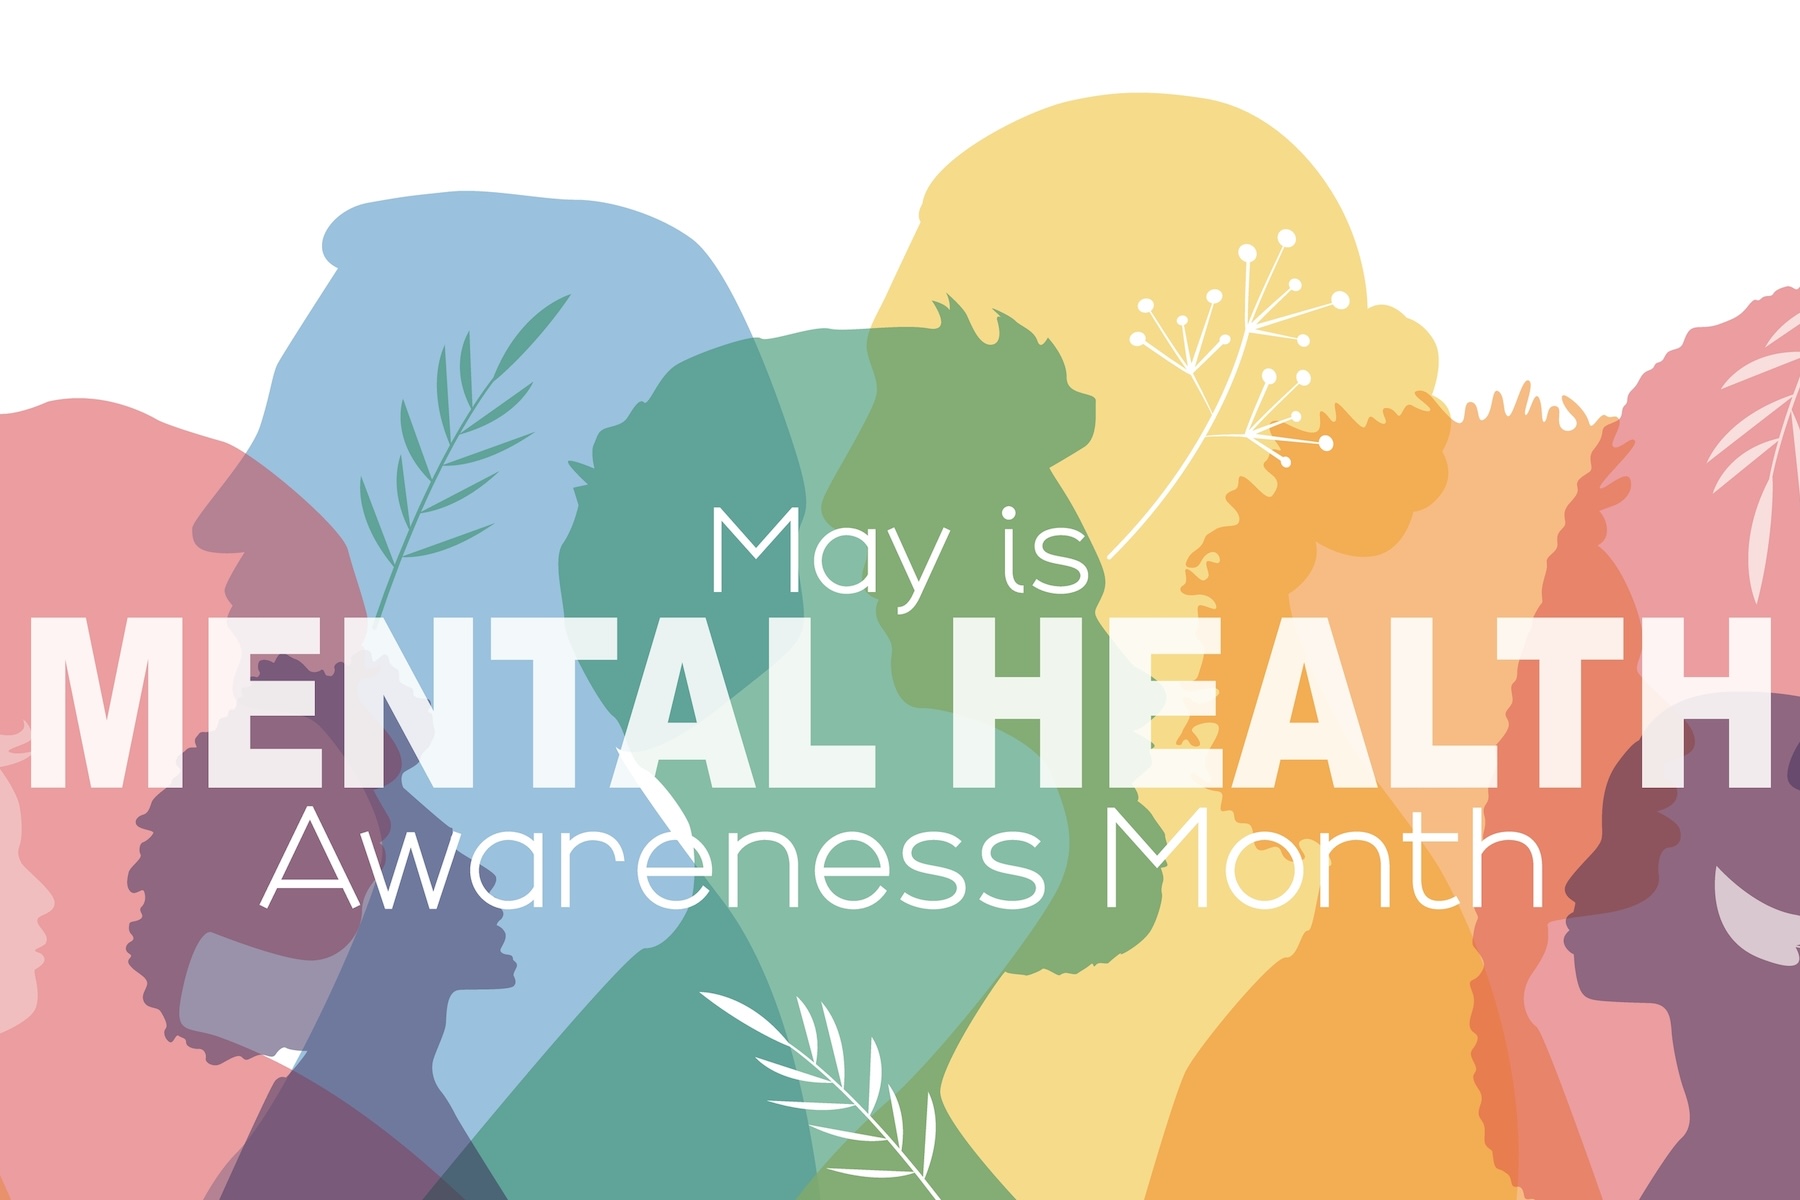 Mental Health Awareness Month: It’s Okay to Not Be Okay